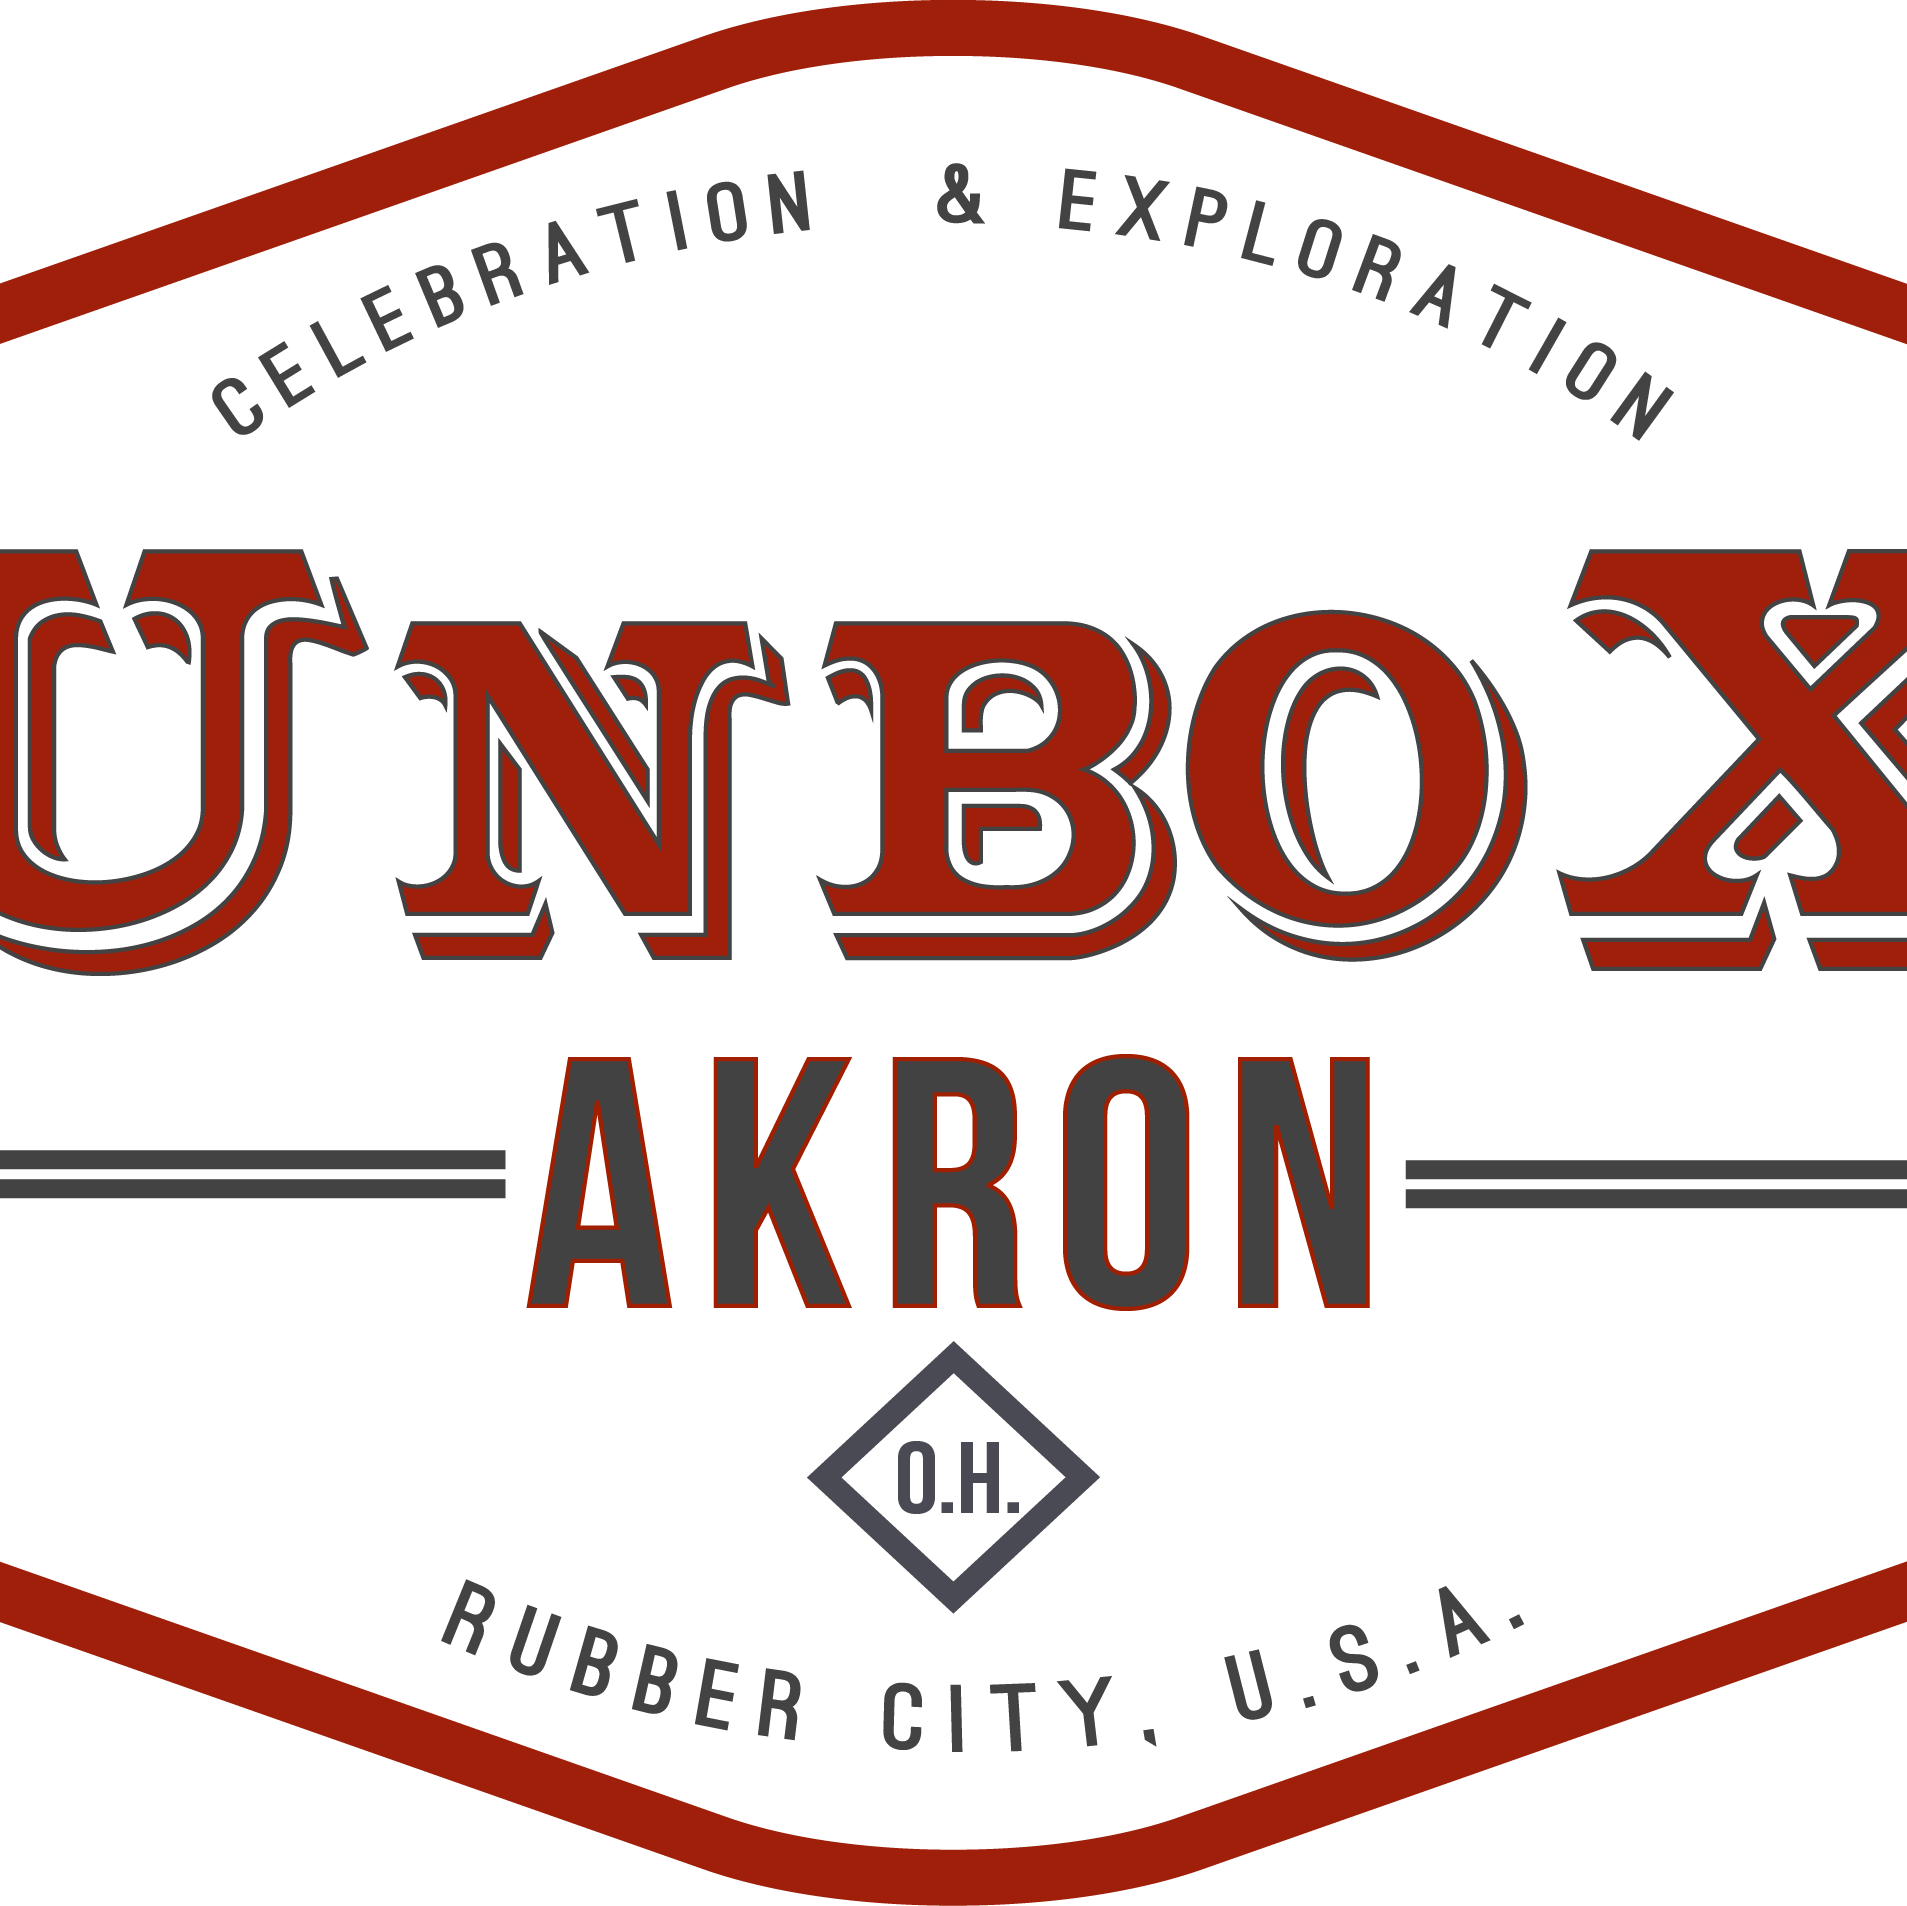 A #KnightCities Challenge-winning monthly subscription box all about celebrating & exploring Akron, Ohio.